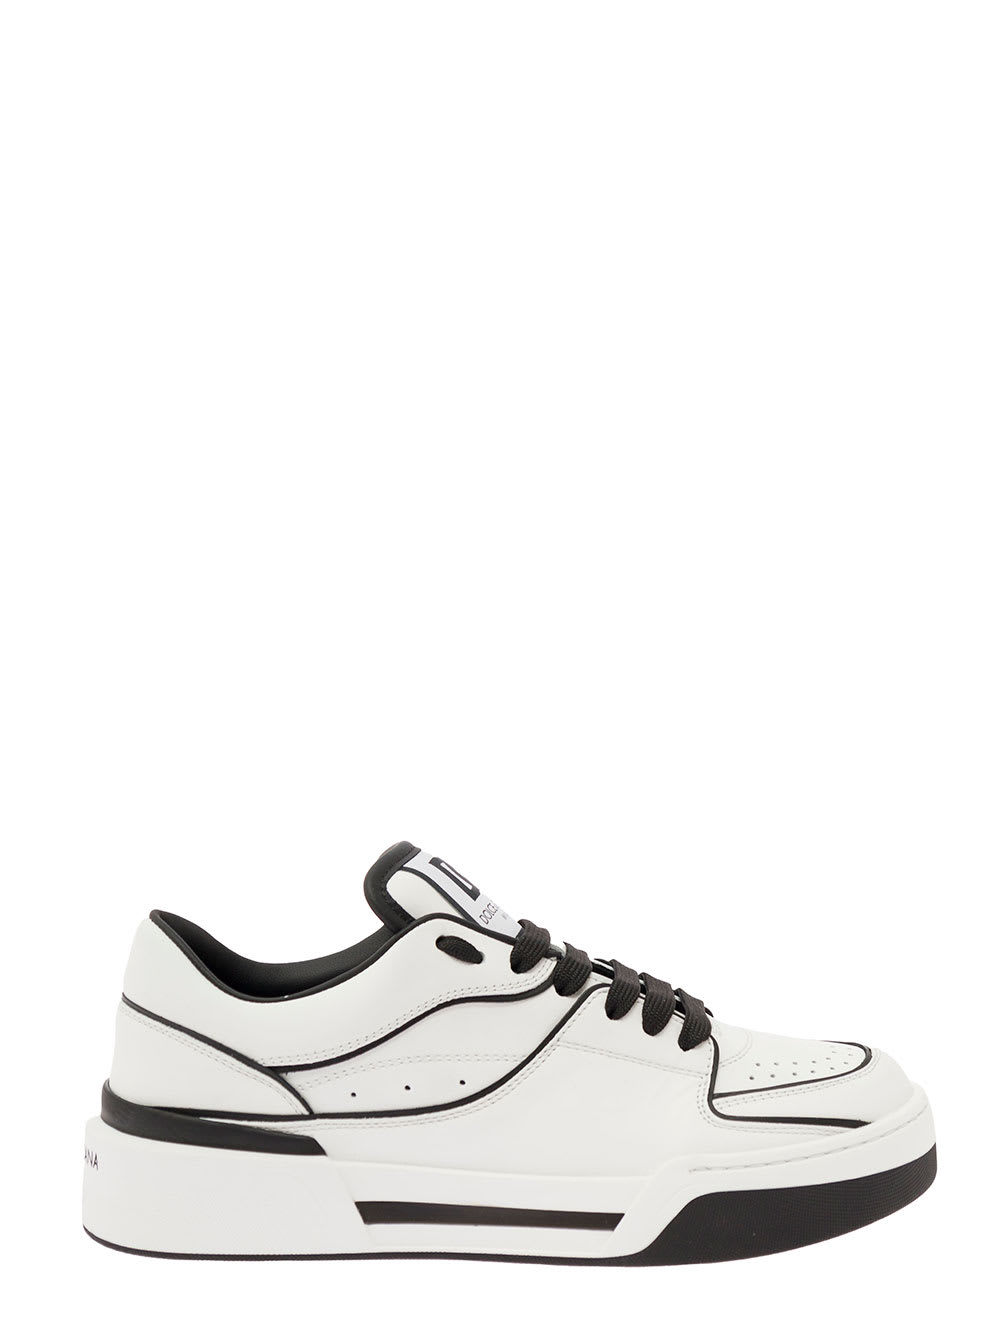 Dolce & Gabbana new Roma Black And White Sneakers With Contrasting 3d Details Woman Dolce & Gabbana